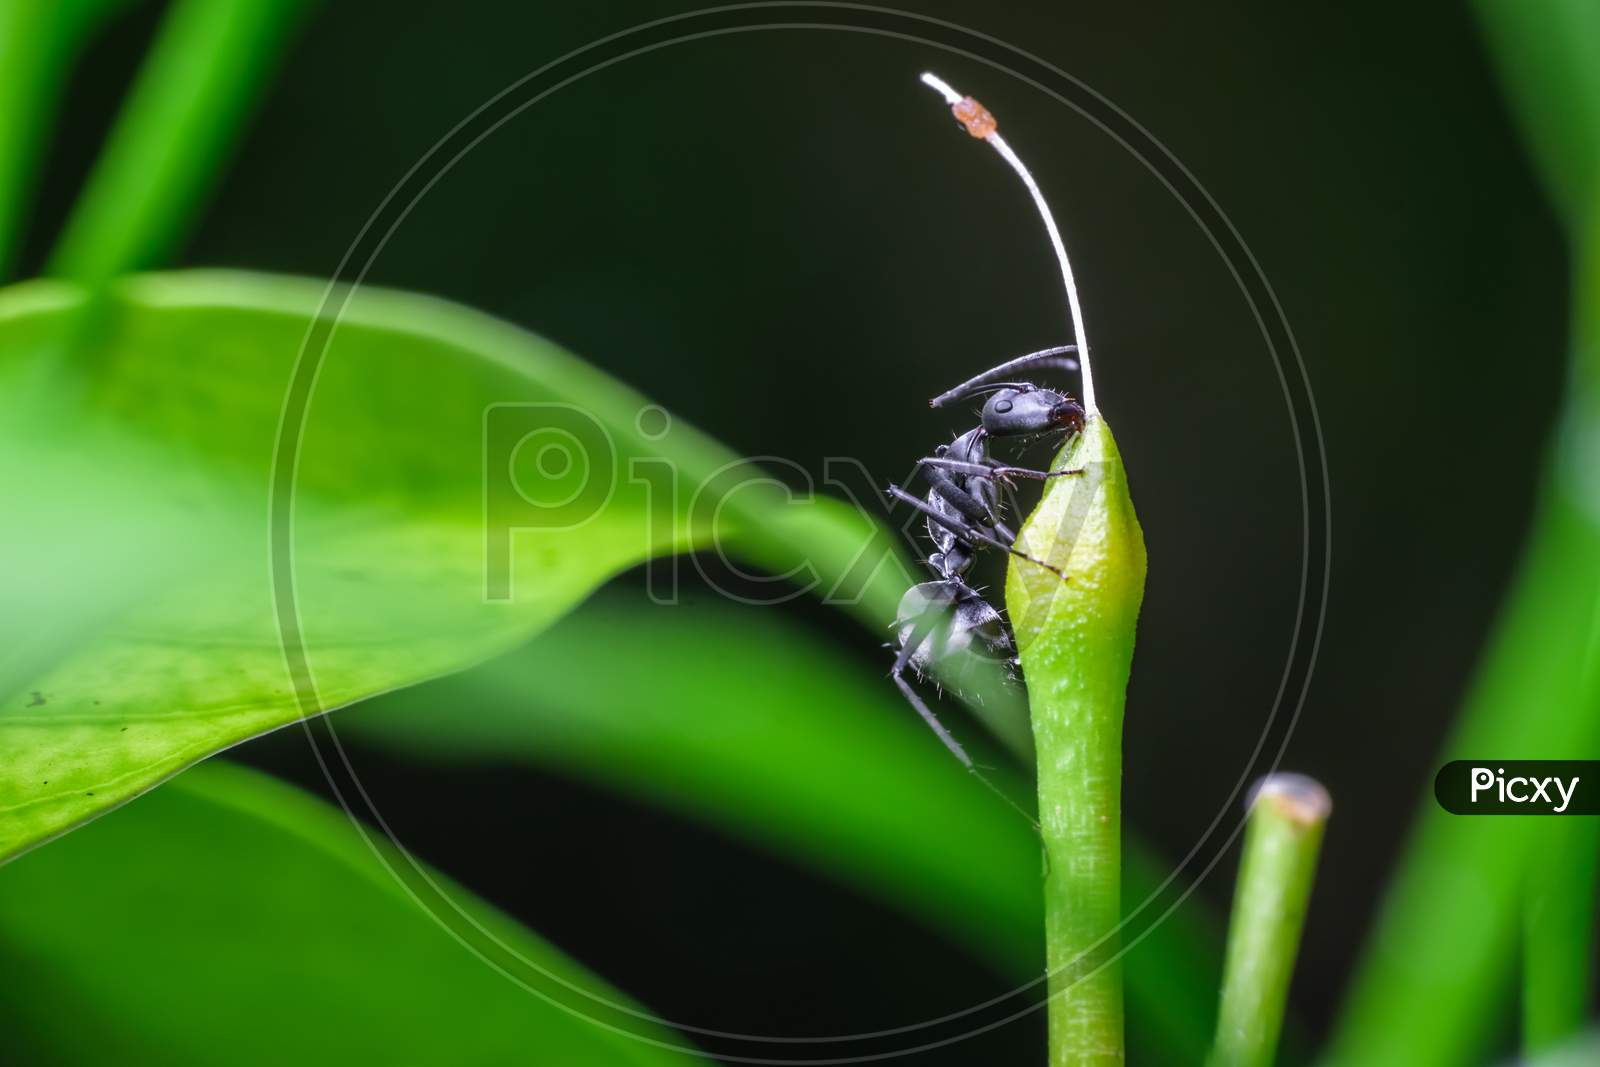 Isolated Carpenter Ant Approaching The Top Of A Plant Part